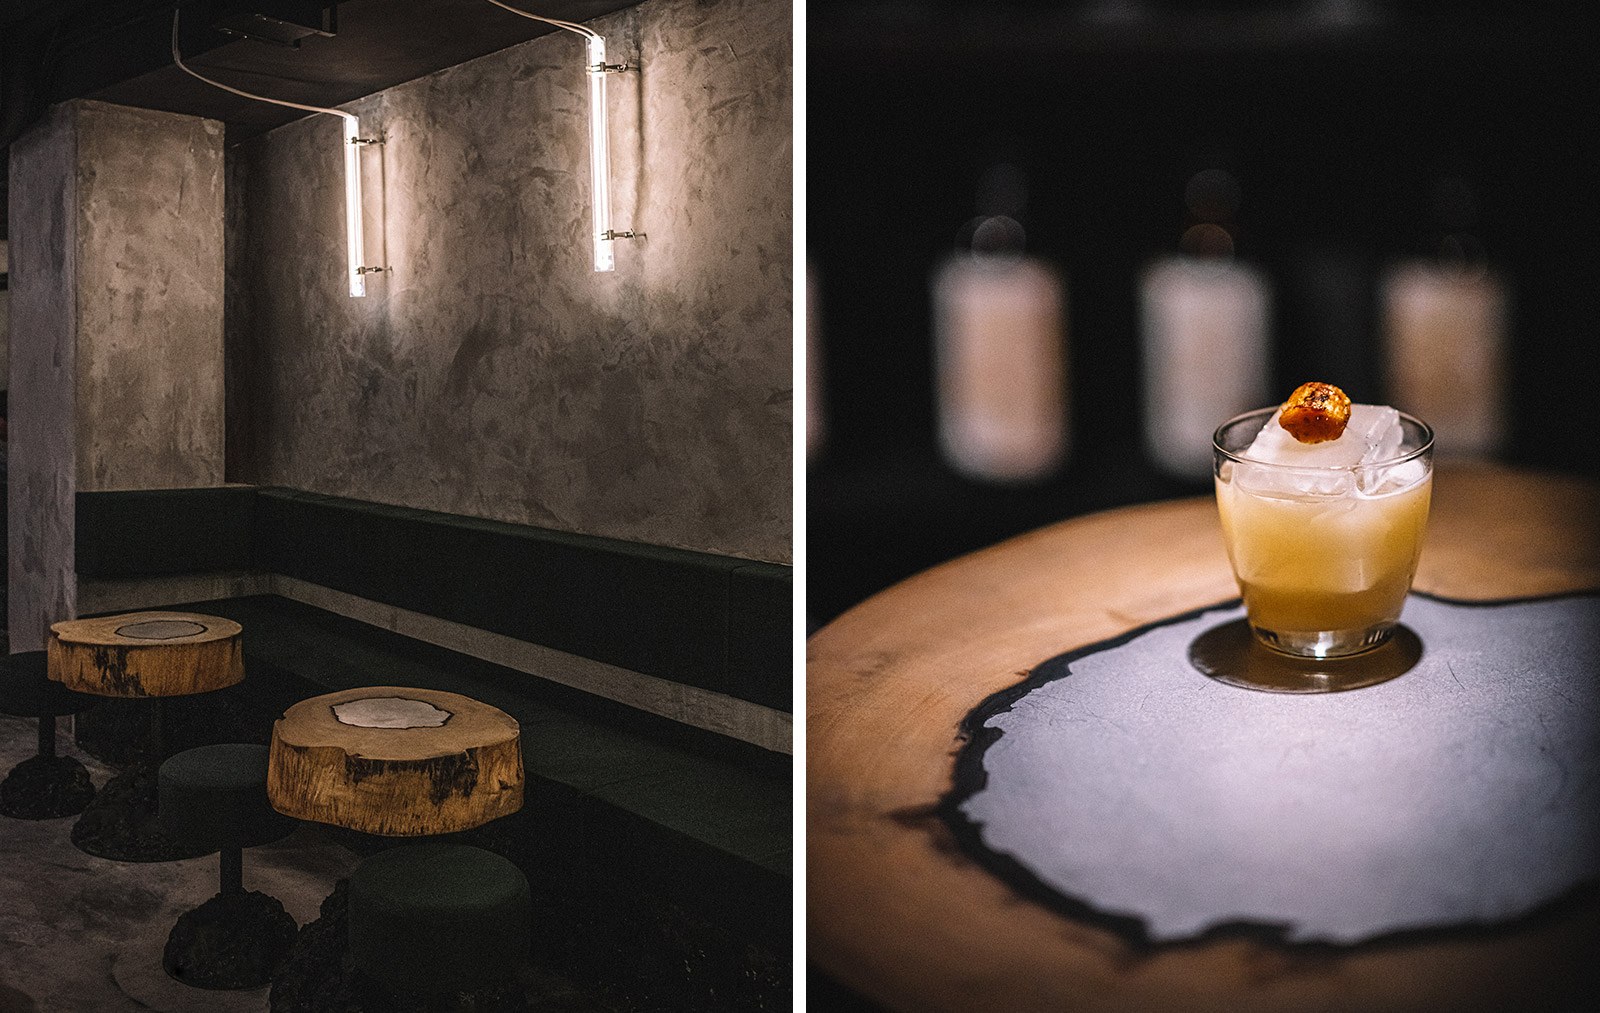 Interior and cocktails at Penicillin, one of Hong Kong's hottest restaurants and bars